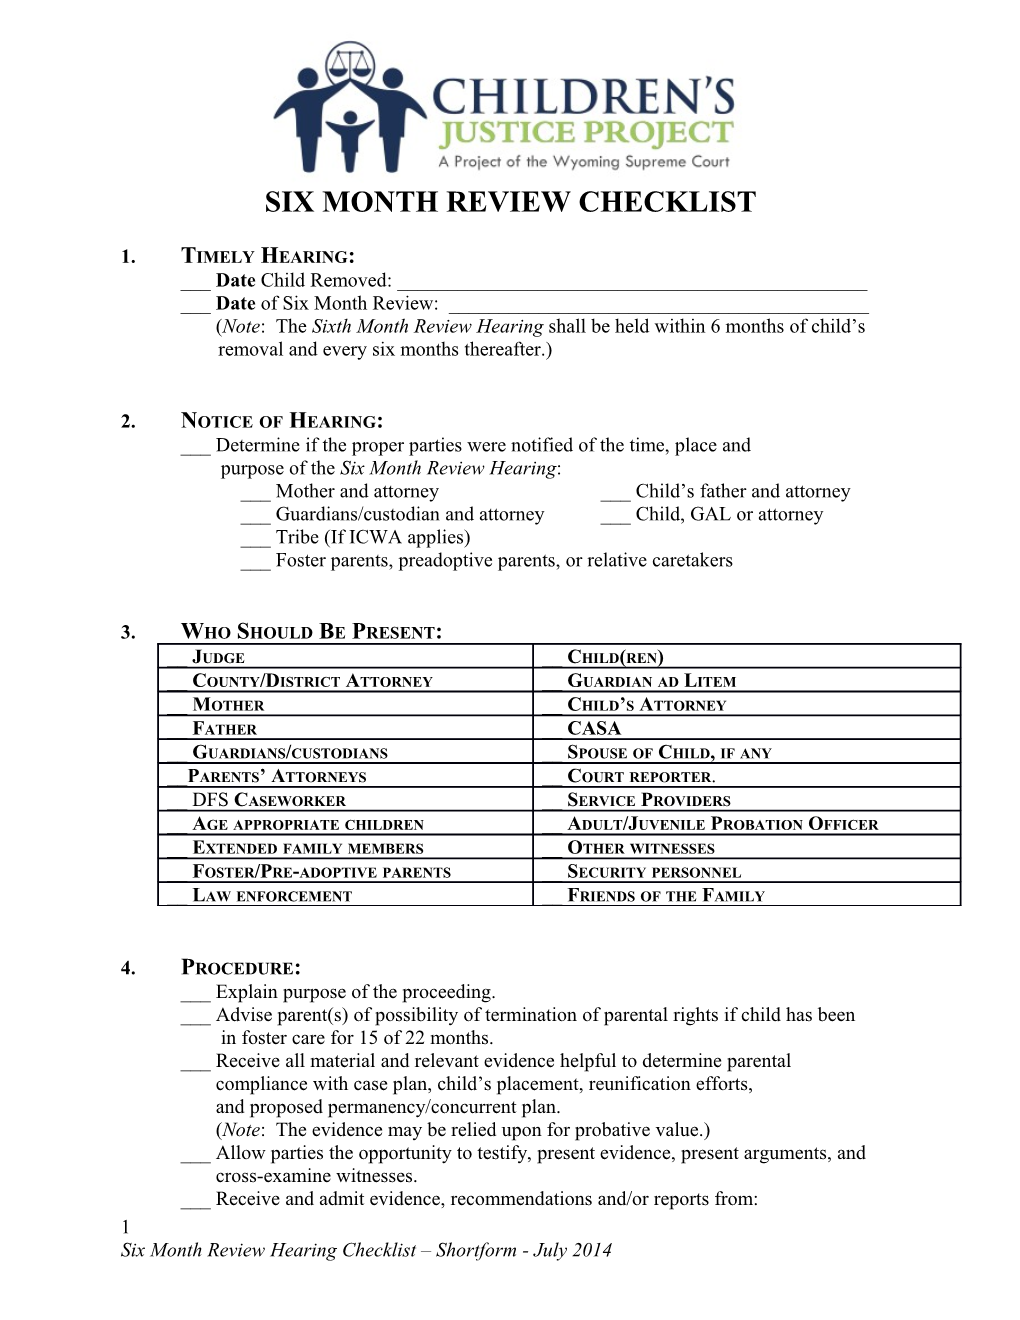 Shelter Care and Initial Hearing Checklist